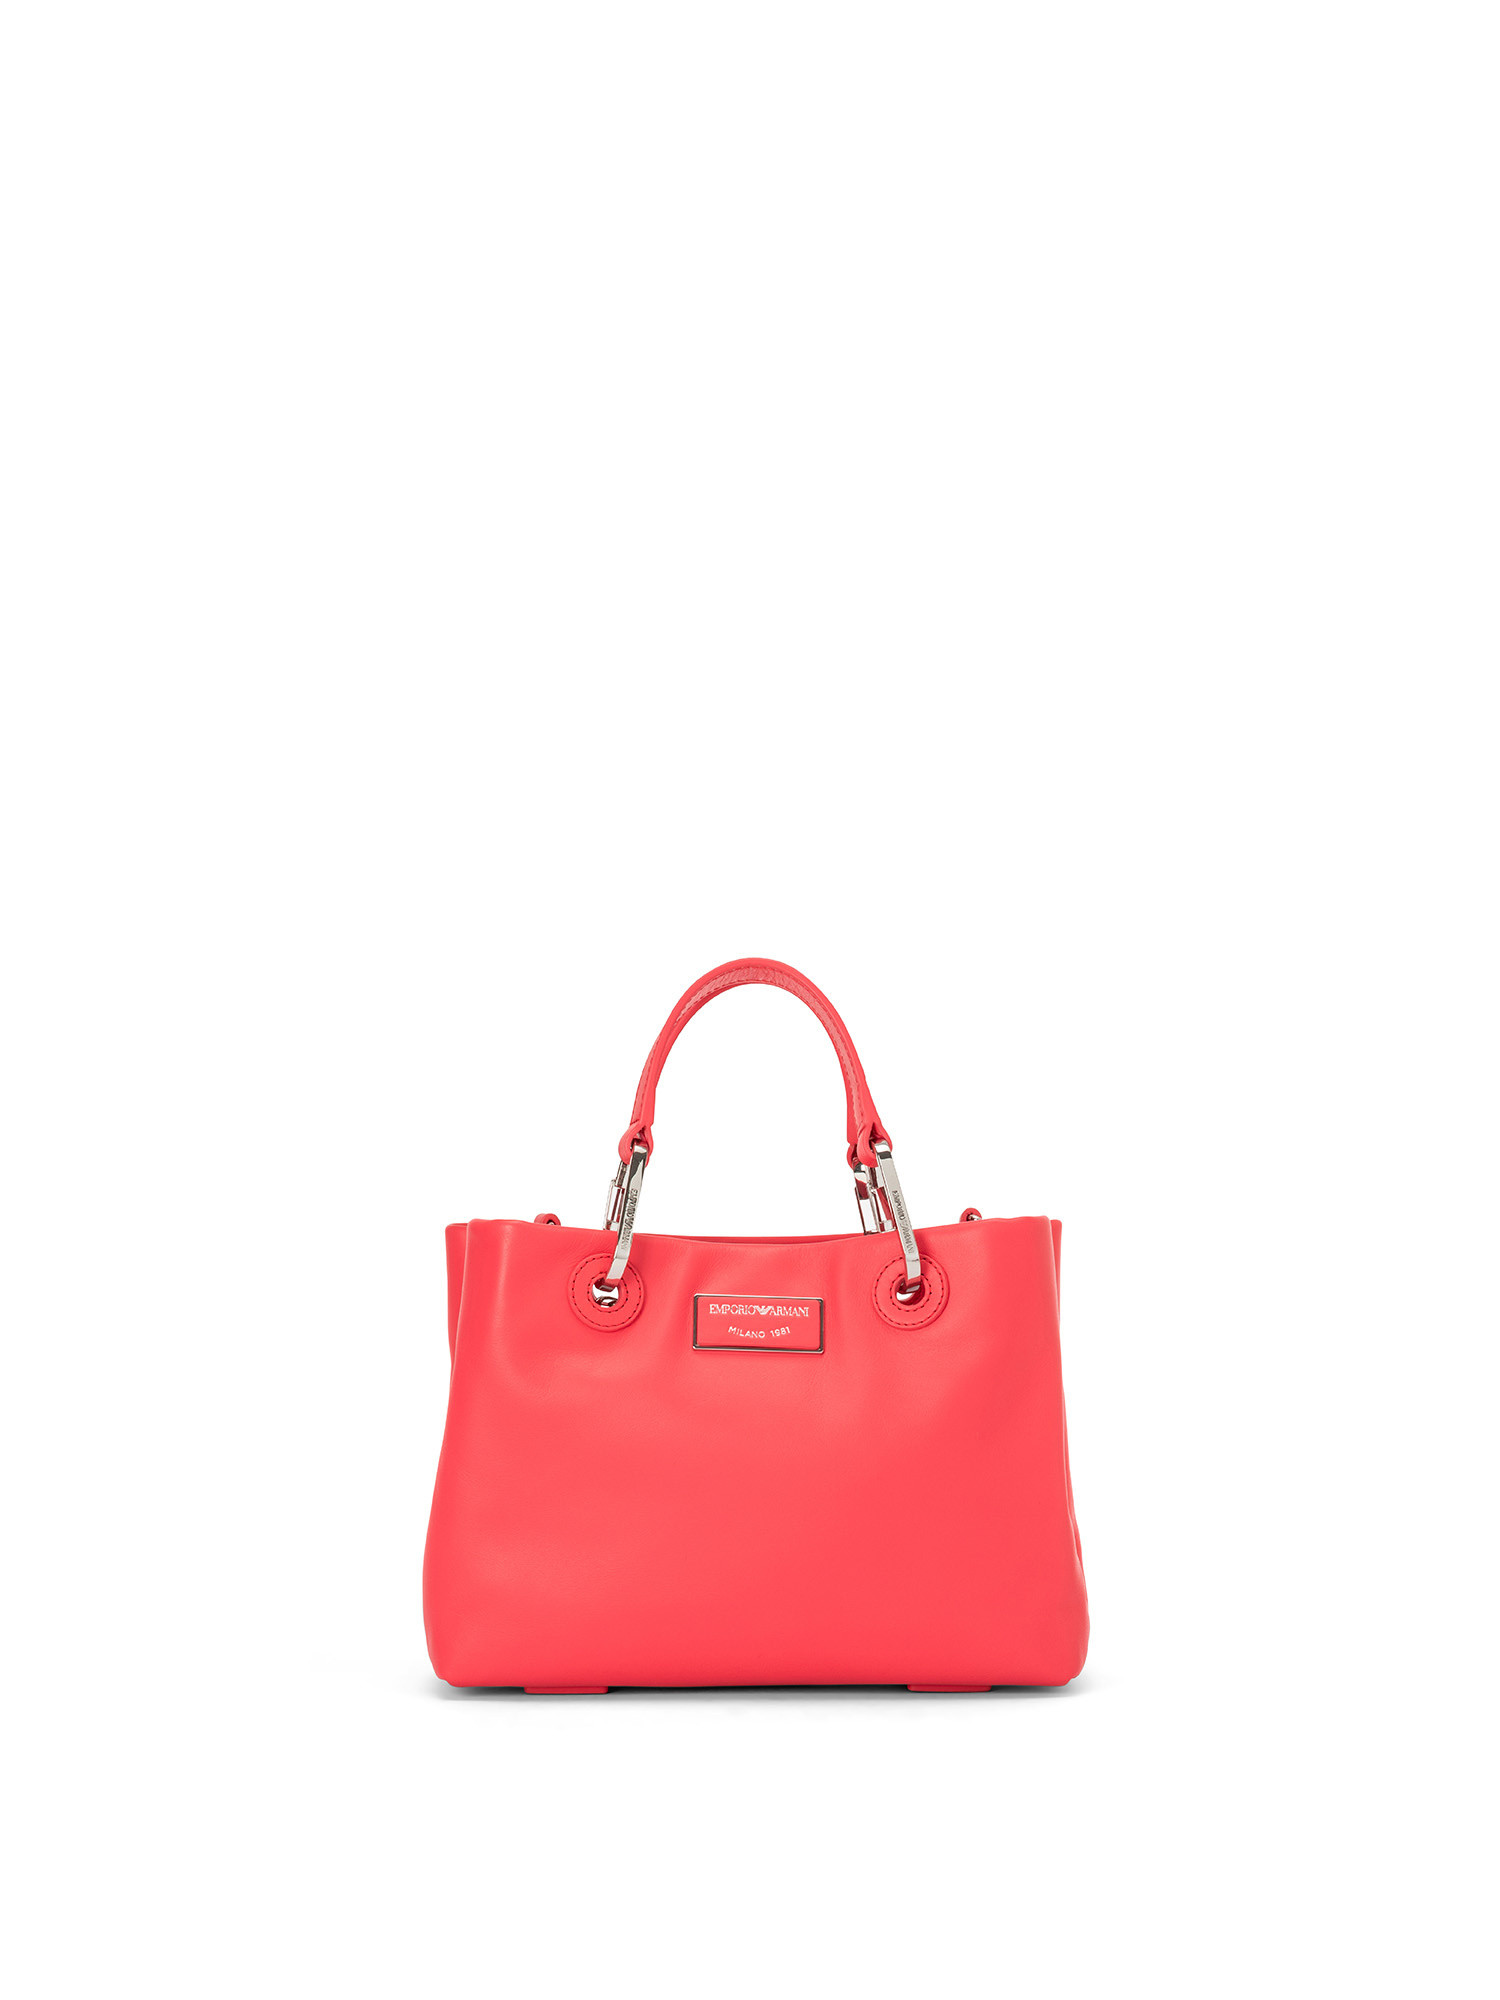 Emporio Armani - Shopper bag in pelle ecologica, Rosso, large image number 0